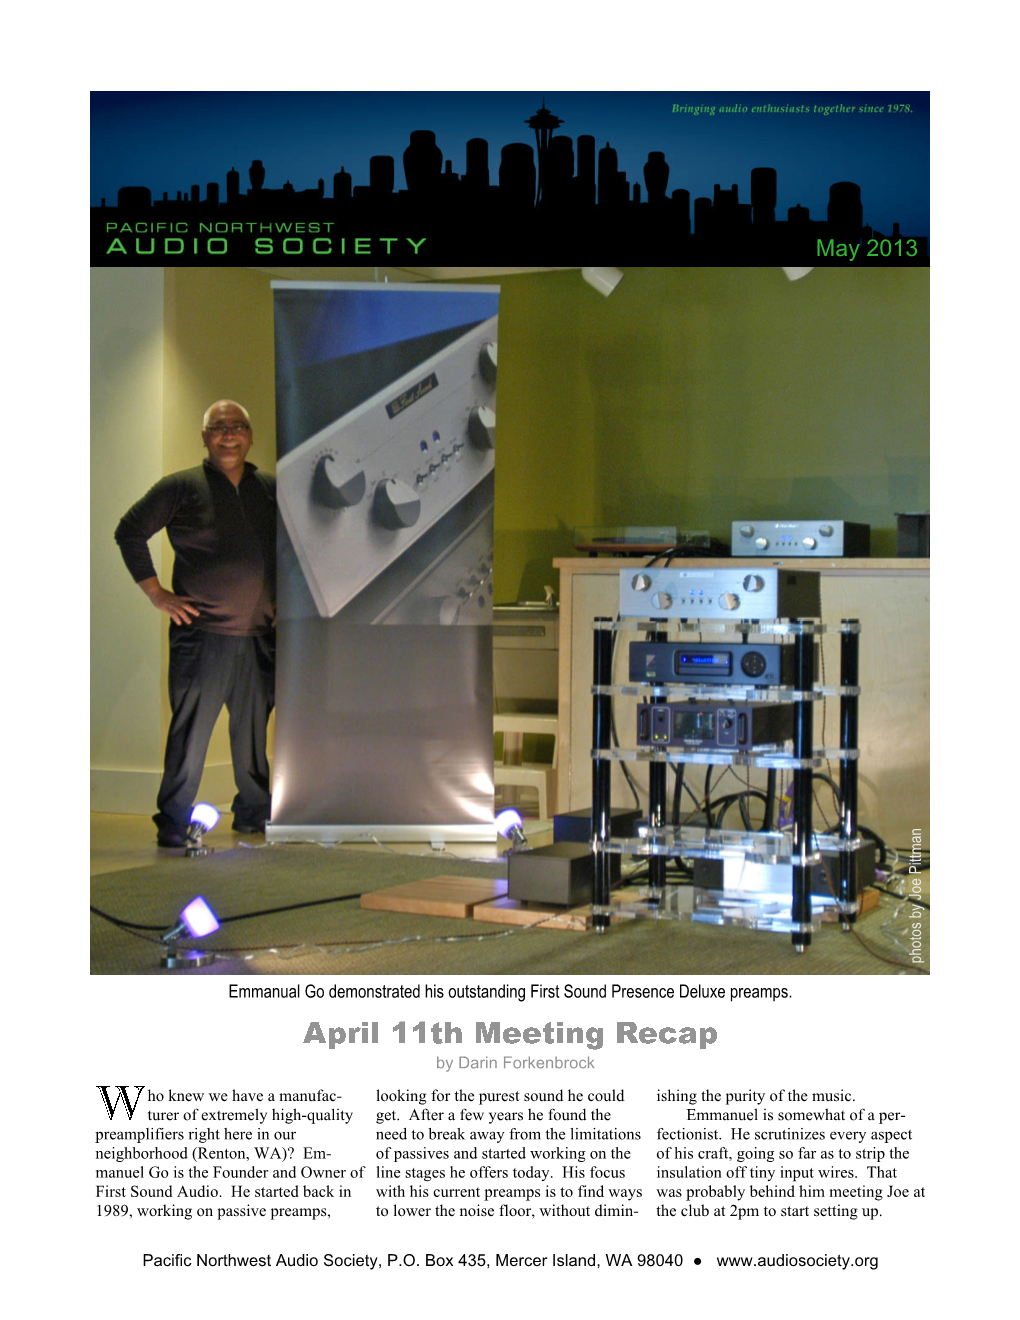 PNWAS Audioletter May 2013.Pub